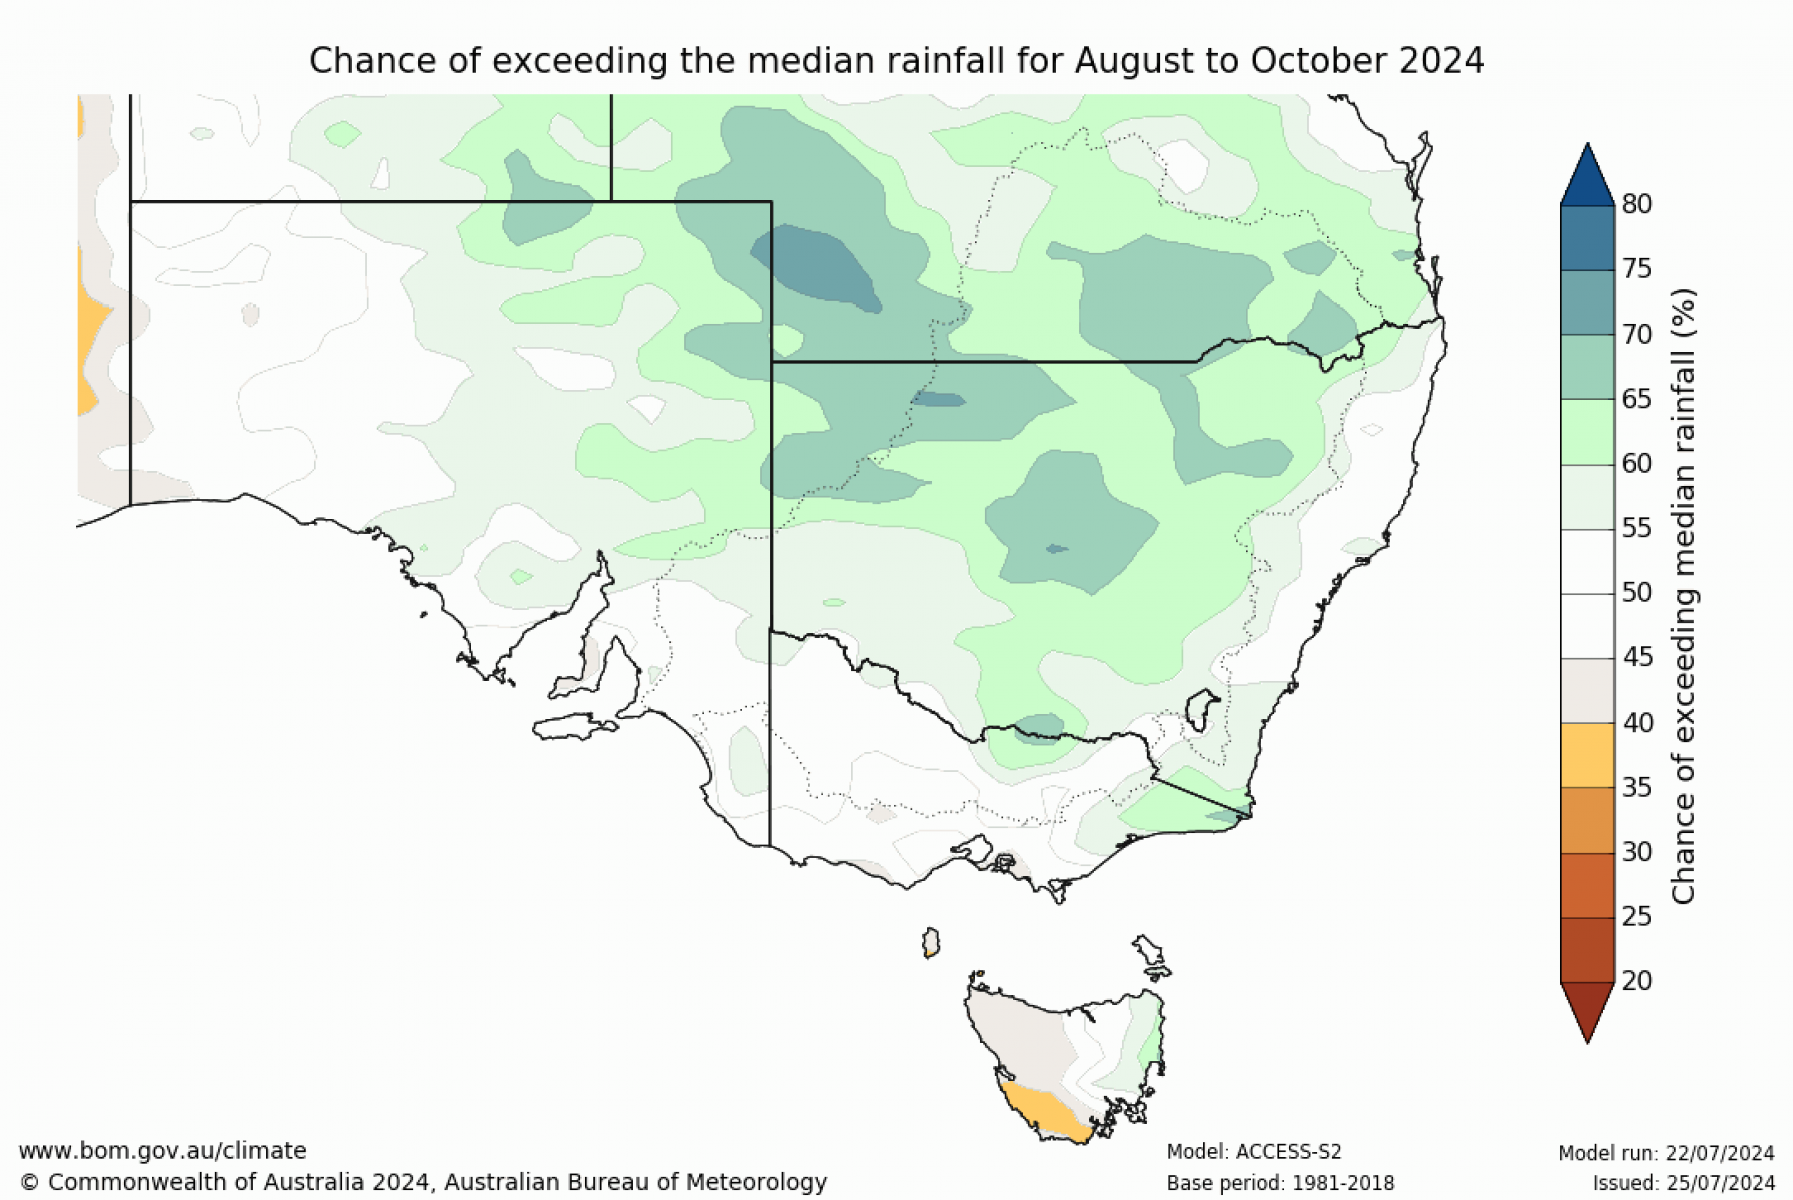 Chance of exceeding median rainfall for August to October 2024